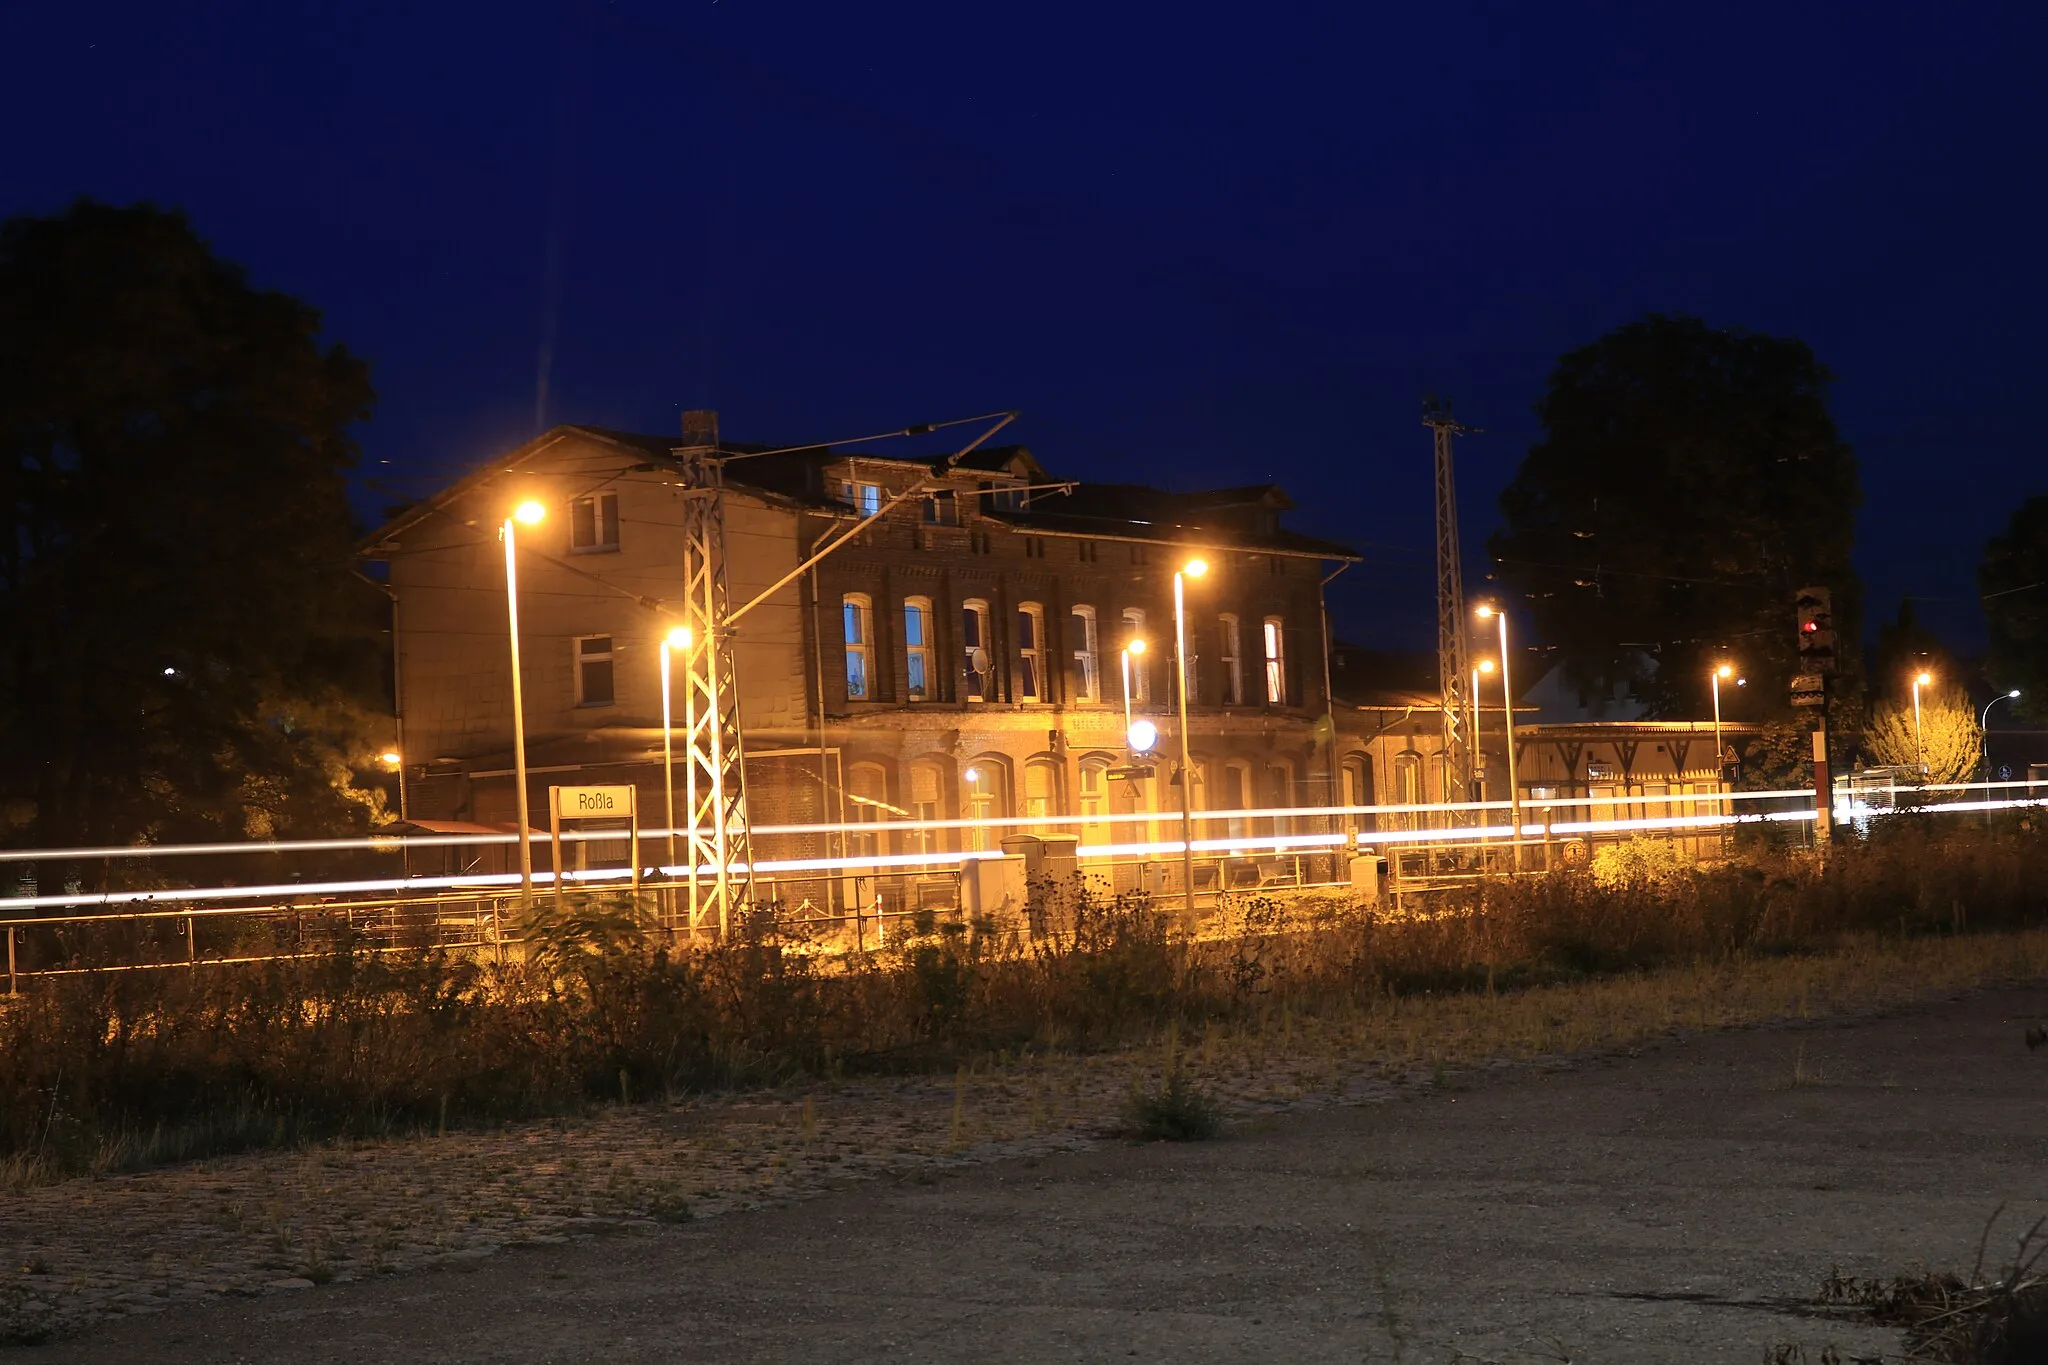 Photo showing: The building of the train station Roßla in Saxony-Anhalt, part of the railway line from Hannoversch Münden to Halle, at night.